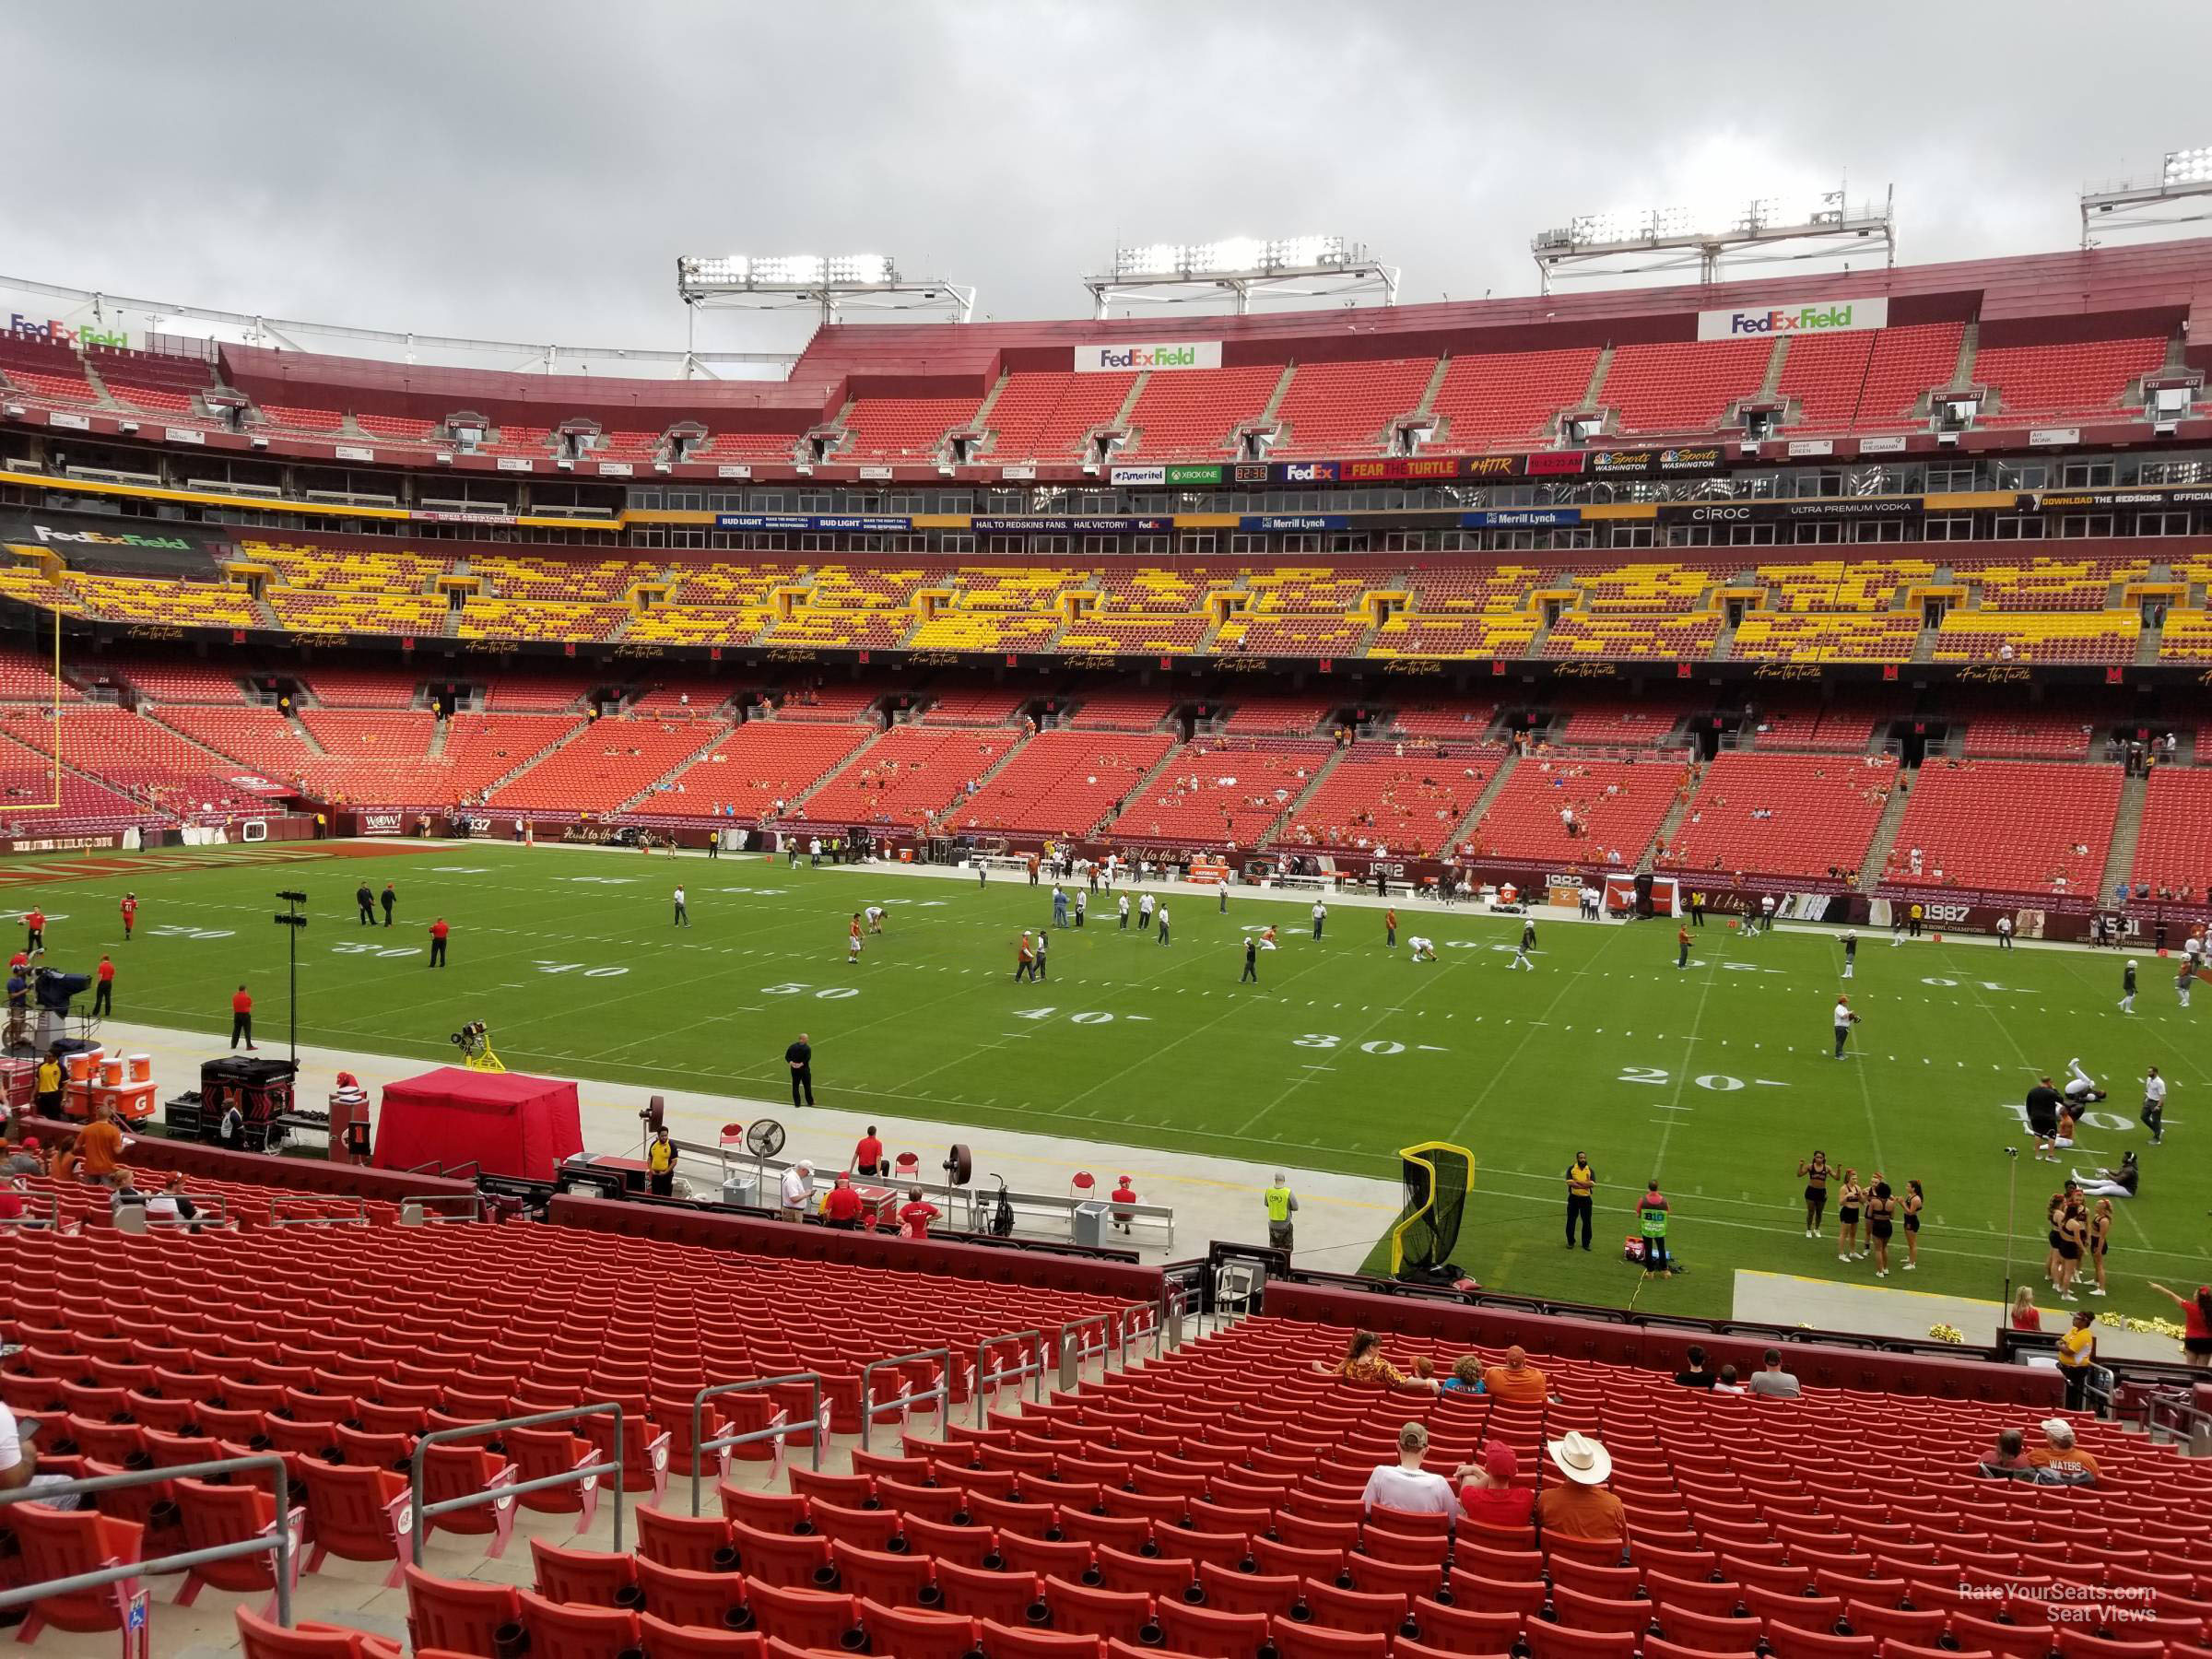 section 240, row 1 seat view  - fedexfield